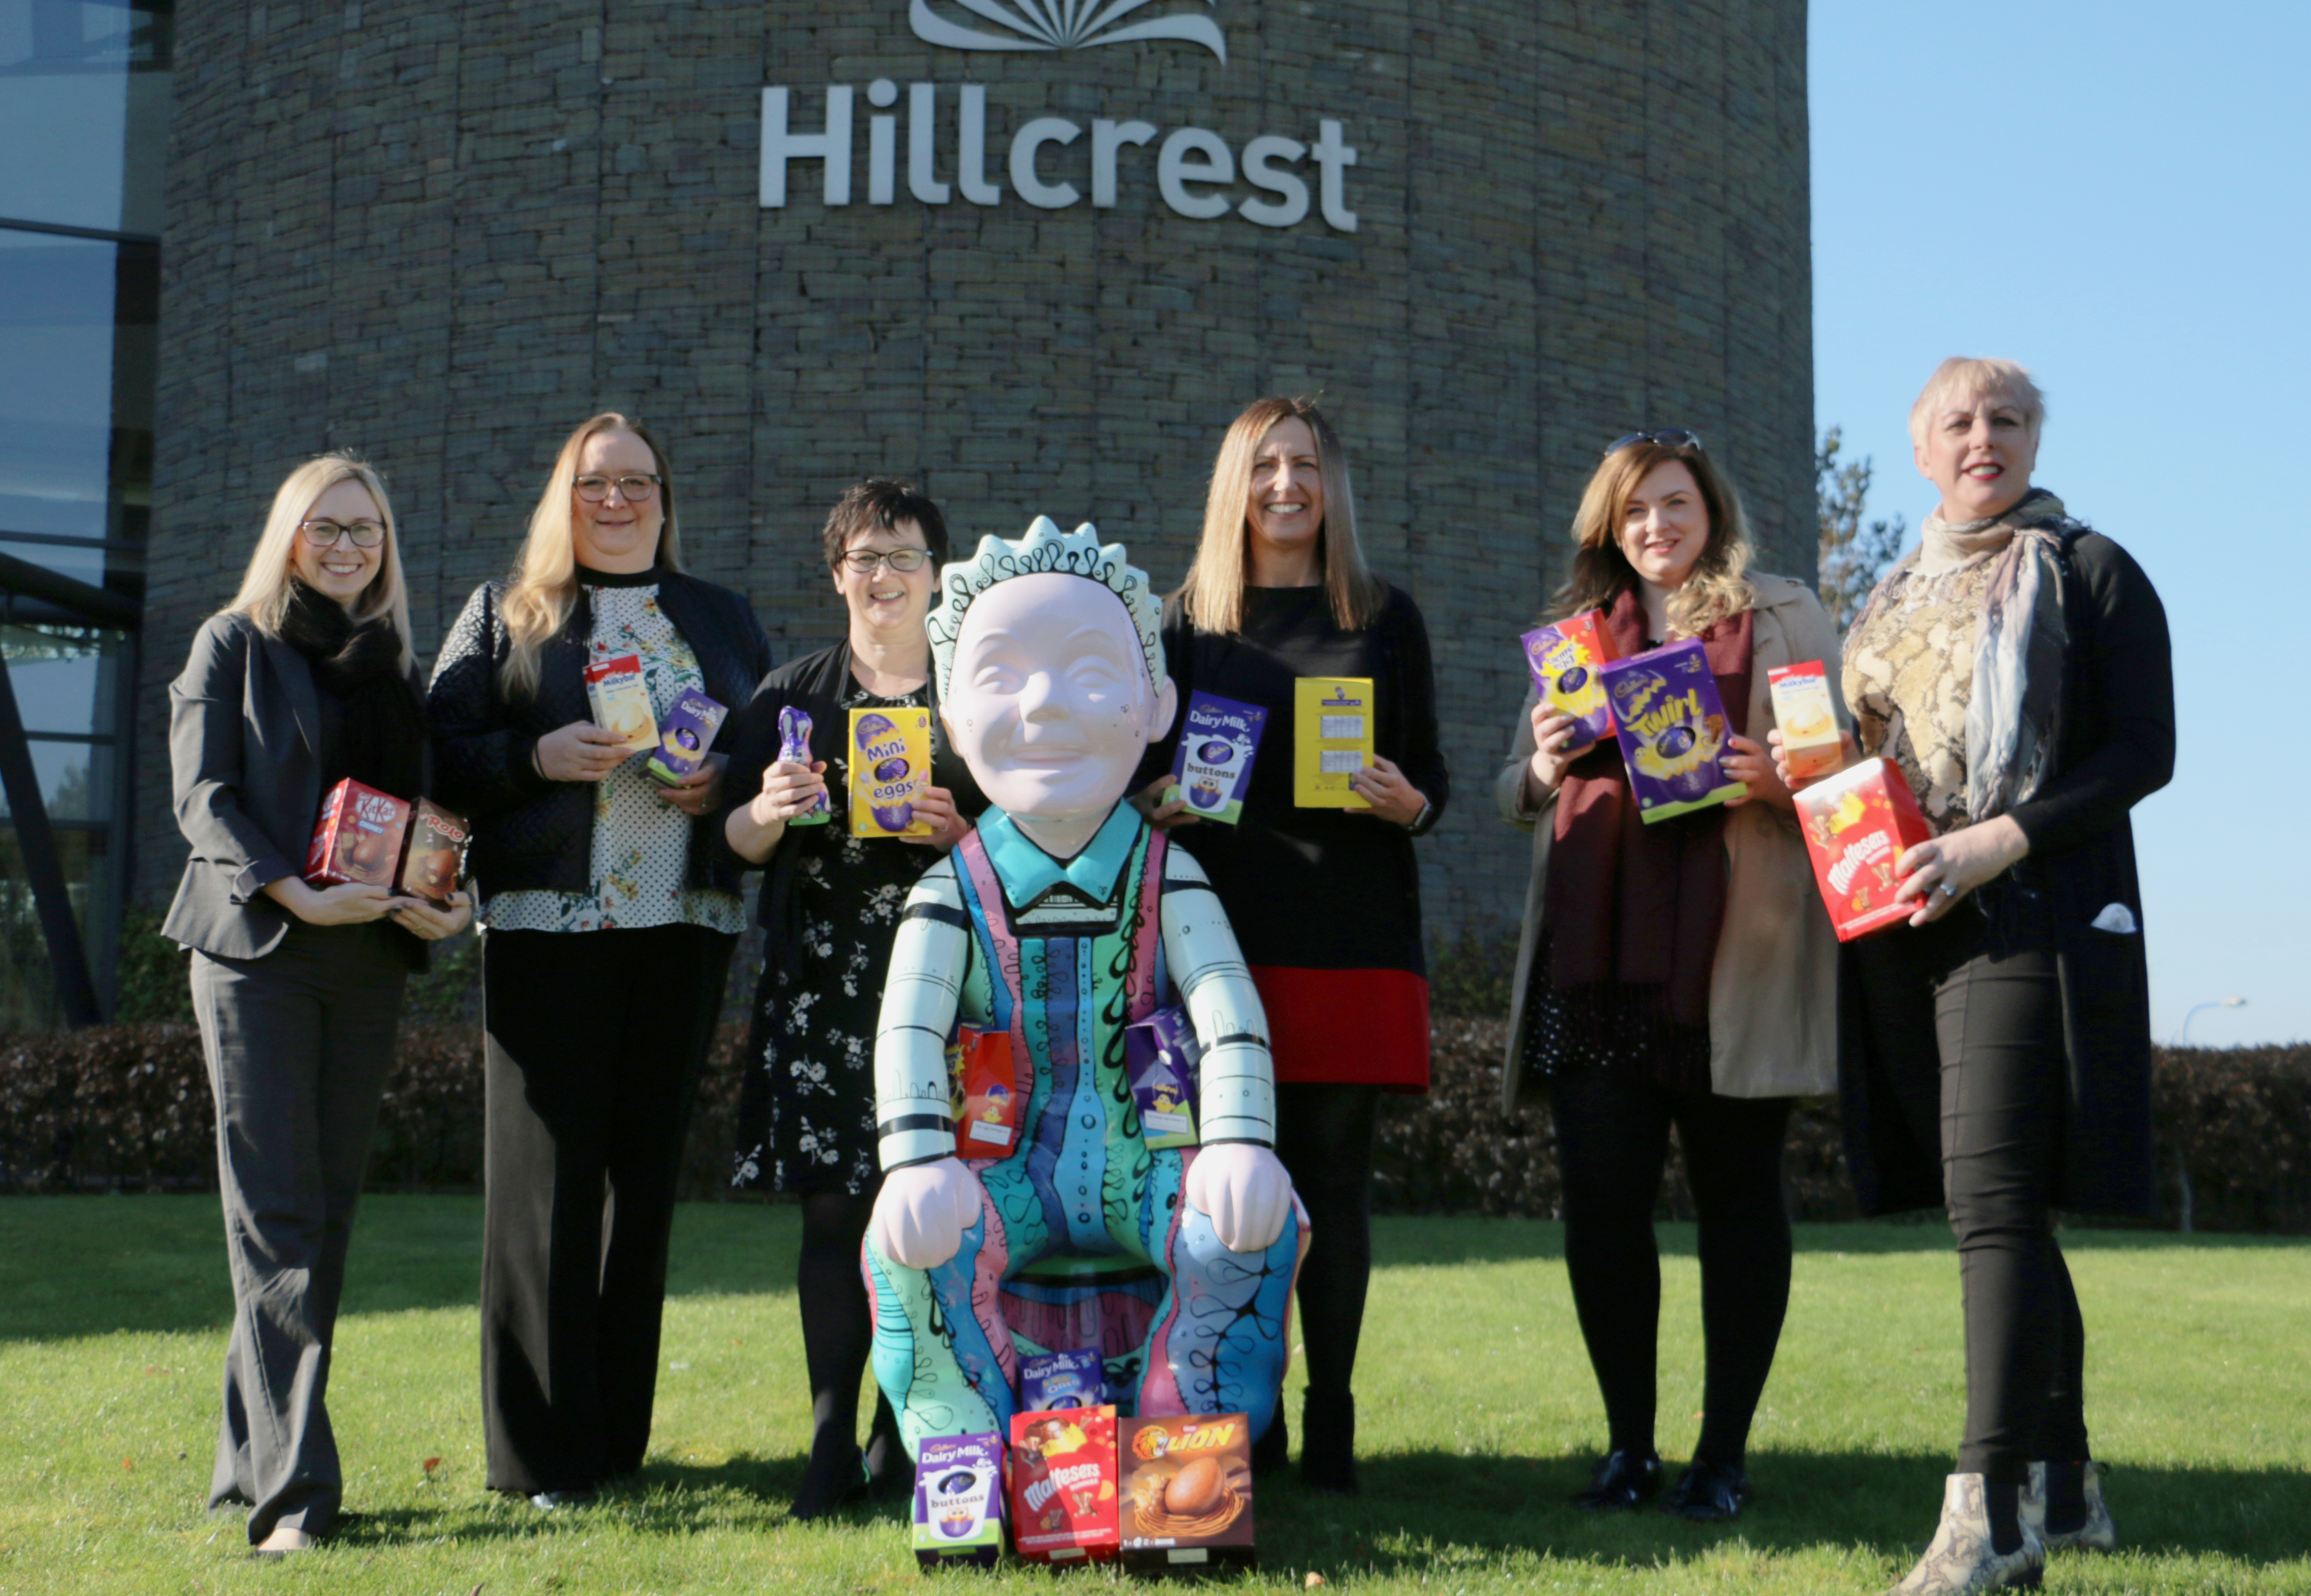 Hillcrest and Thorntons team up to give families an eggs-celent Easter